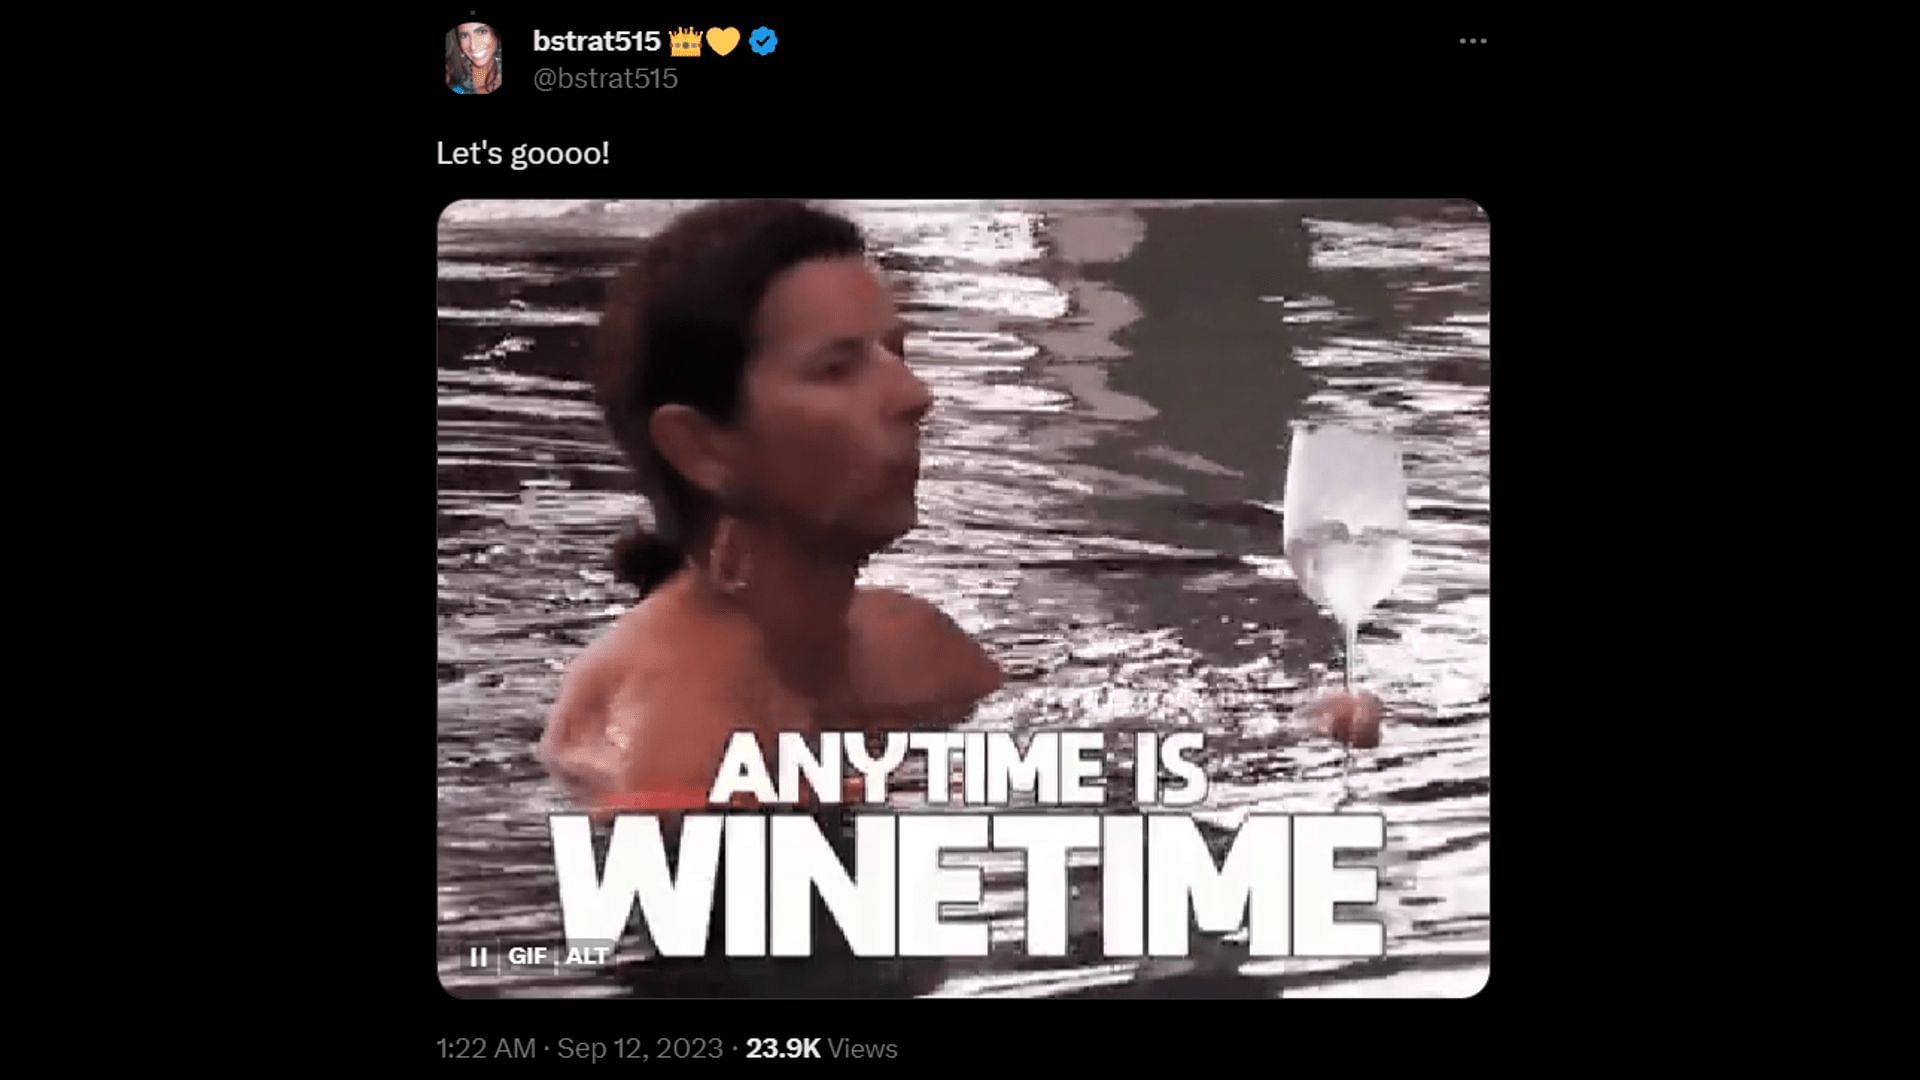 A netizen says anytime is wine time. (Image via X/bstrat515)